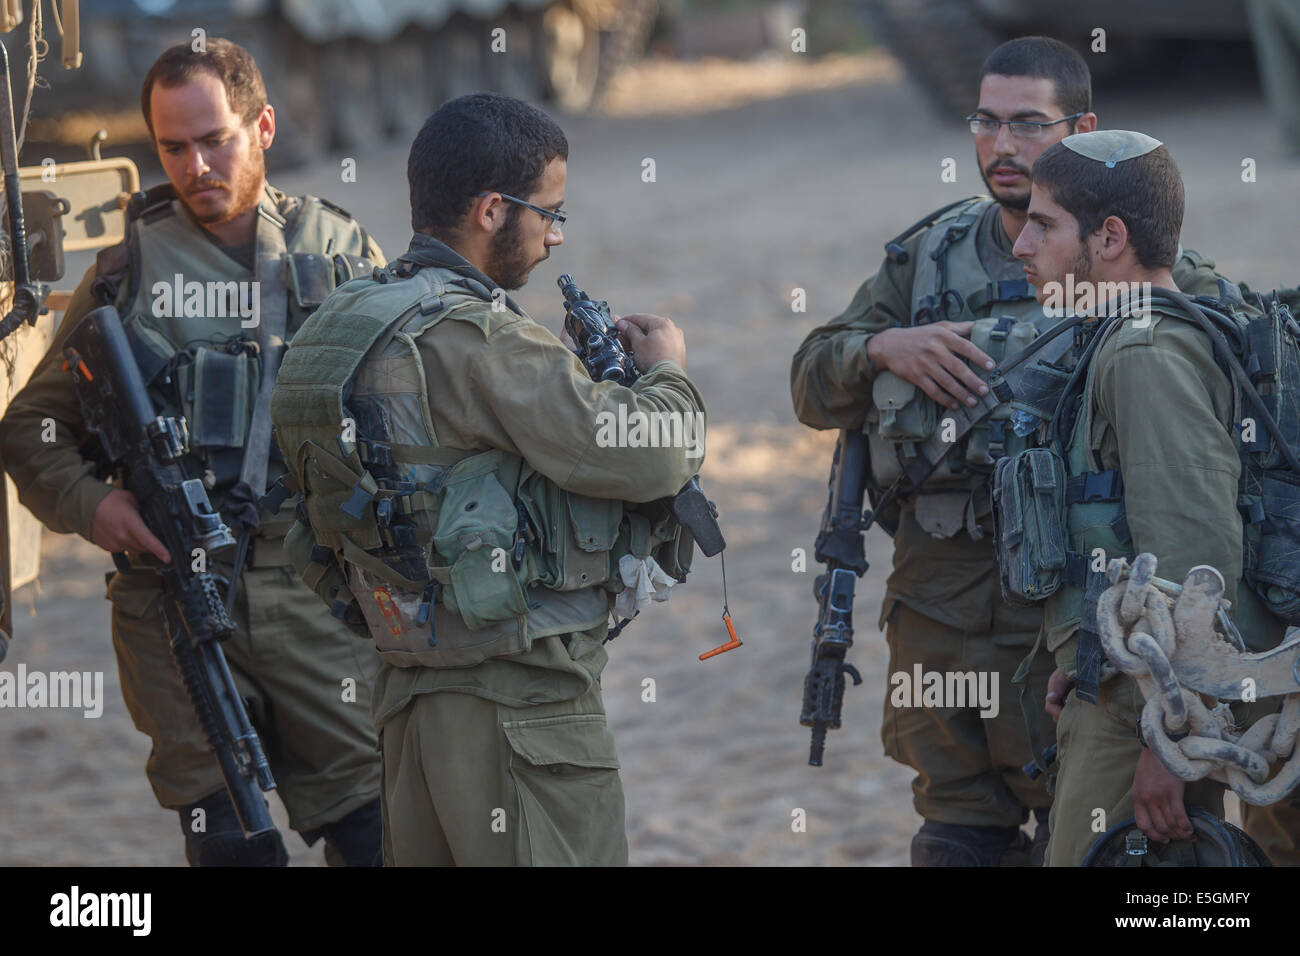 Gaza Border. 30th July, 2014. Israeli soldiers from the Golani Brigade are seen at a staging area before entering Gaza from Israel, on July 30, 2014. Israeli Prime Minister Benjamin Netanyahu said on Thursday that Israel will continue to uproot underground tunnels in Gaza regardless of any possible cease-fire agreement. Credit:  JINI/Xinhua/Alamy Live News Stock Photo